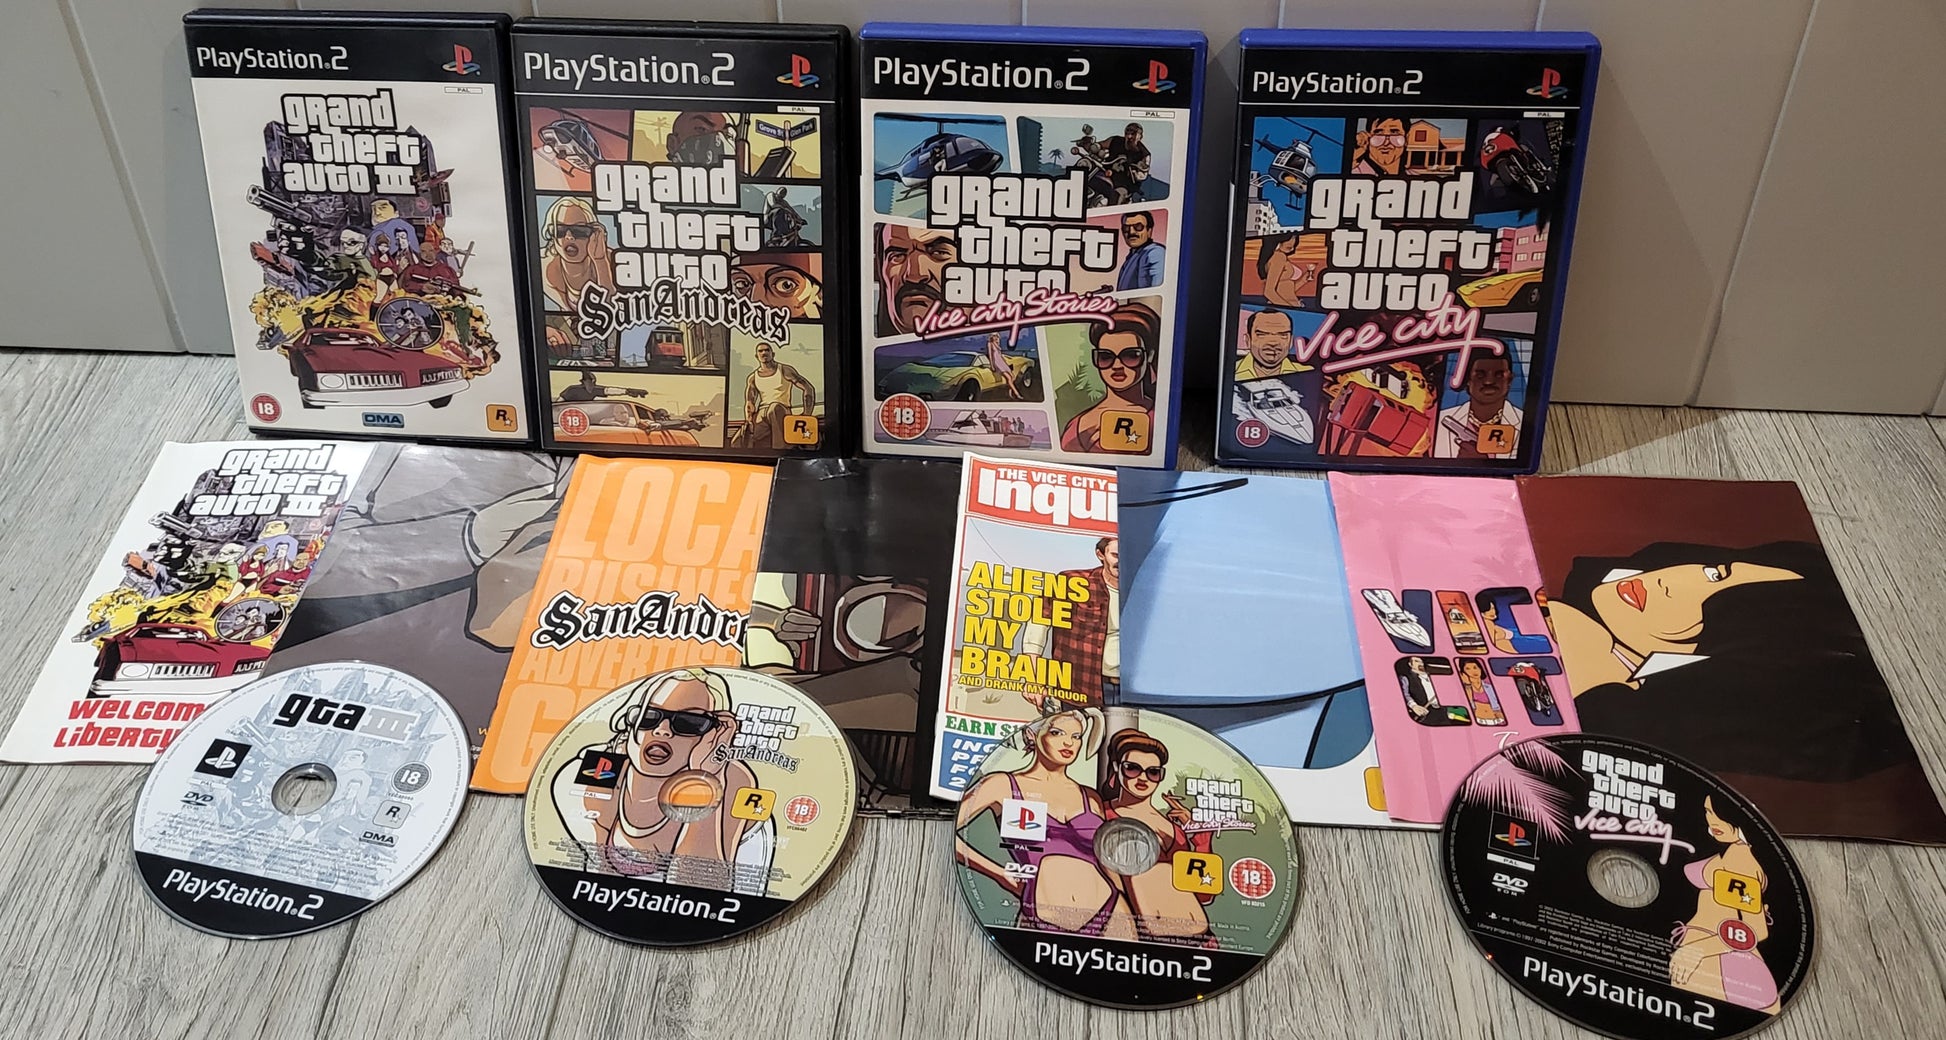 Grand Theft Auto: San Andreas Sony PS2 game – retro game store uk